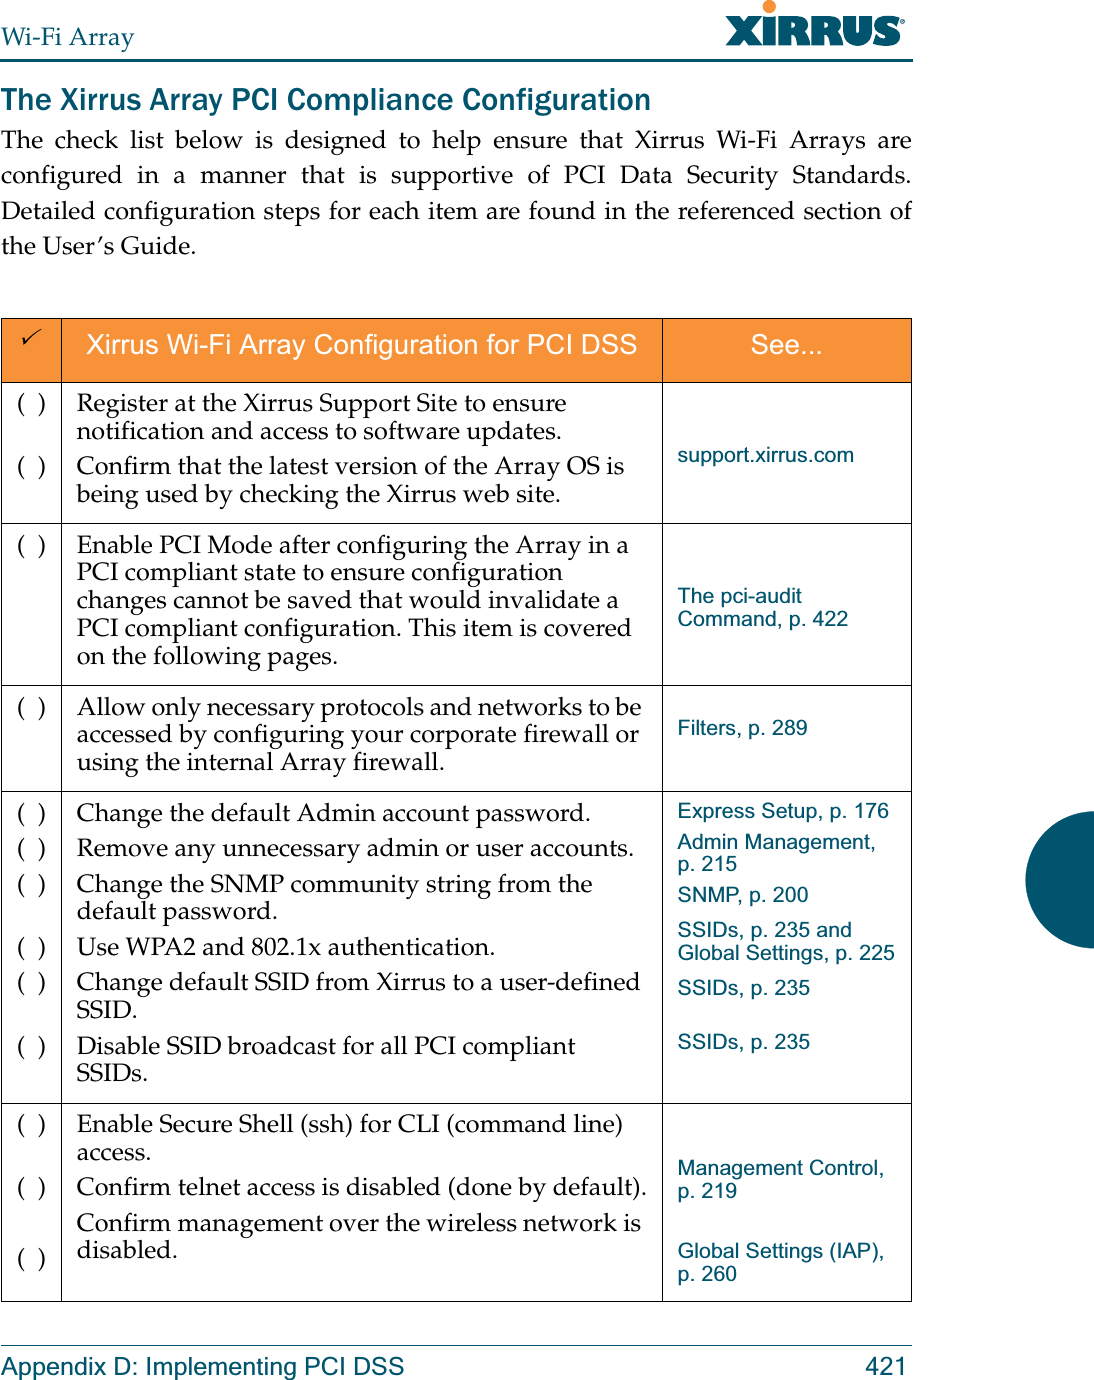 Wi-Fi ArrayAppendix D: Implementing PCI DSS 421The Xirrus Array PCI Compliance Configuration The check list below is designed to help ensure that Xirrus Wi-Fi Arrays are configured in a manner that is supportive of PCI Data Security Standards. Detailed configuration steps for each item are found in the referenced section of the User’s Guide.3Xirrus Wi-Fi Array Configuration for PCI DSS See...(  )(  )Register at the Xirrus Support Site to ensure notification and access to software updates.Confirm that the latest version of the Array OS is being used by checking the Xirrus web site.support.xirrus.com(  ) Enable PCI Mode after configuring the Array in a PCI compliant state to ensure configuration changes cannot be saved that would invalidate a PCI compliant configuration. This item is covered on the following pages.The pci-audit Command, p. 422(  ) Allow only necessary protocols and networks to be accessed by configuring your corporate firewall or using the internal Array firewall. Filters, p. 289(  )(  )(  )(  )(  )(  )Change the default Admin account password. Remove any unnecessary admin or user accounts.Change the SNMP community string from the default password.Use WPA2 and 802.1x authentication.Change default SSID from Xirrus to a user-defined SSID.Disable SSID broadcast for all PCI compliant SSIDs.Express Setup, p. 176Admin Management, p. 215SNMP, p. 200SSIDs, p. 235 and Global Settings, p. 225SSIDs, p. 235SSIDs, p. 235(  )(  )(  )Enable Secure Shell (ssh) for CLI (command line) access.Confirm telnet access is disabled (done by default).Confirm management over the wireless network is disabled.Management Control, p. 219Global Settings (IAP), p. 260